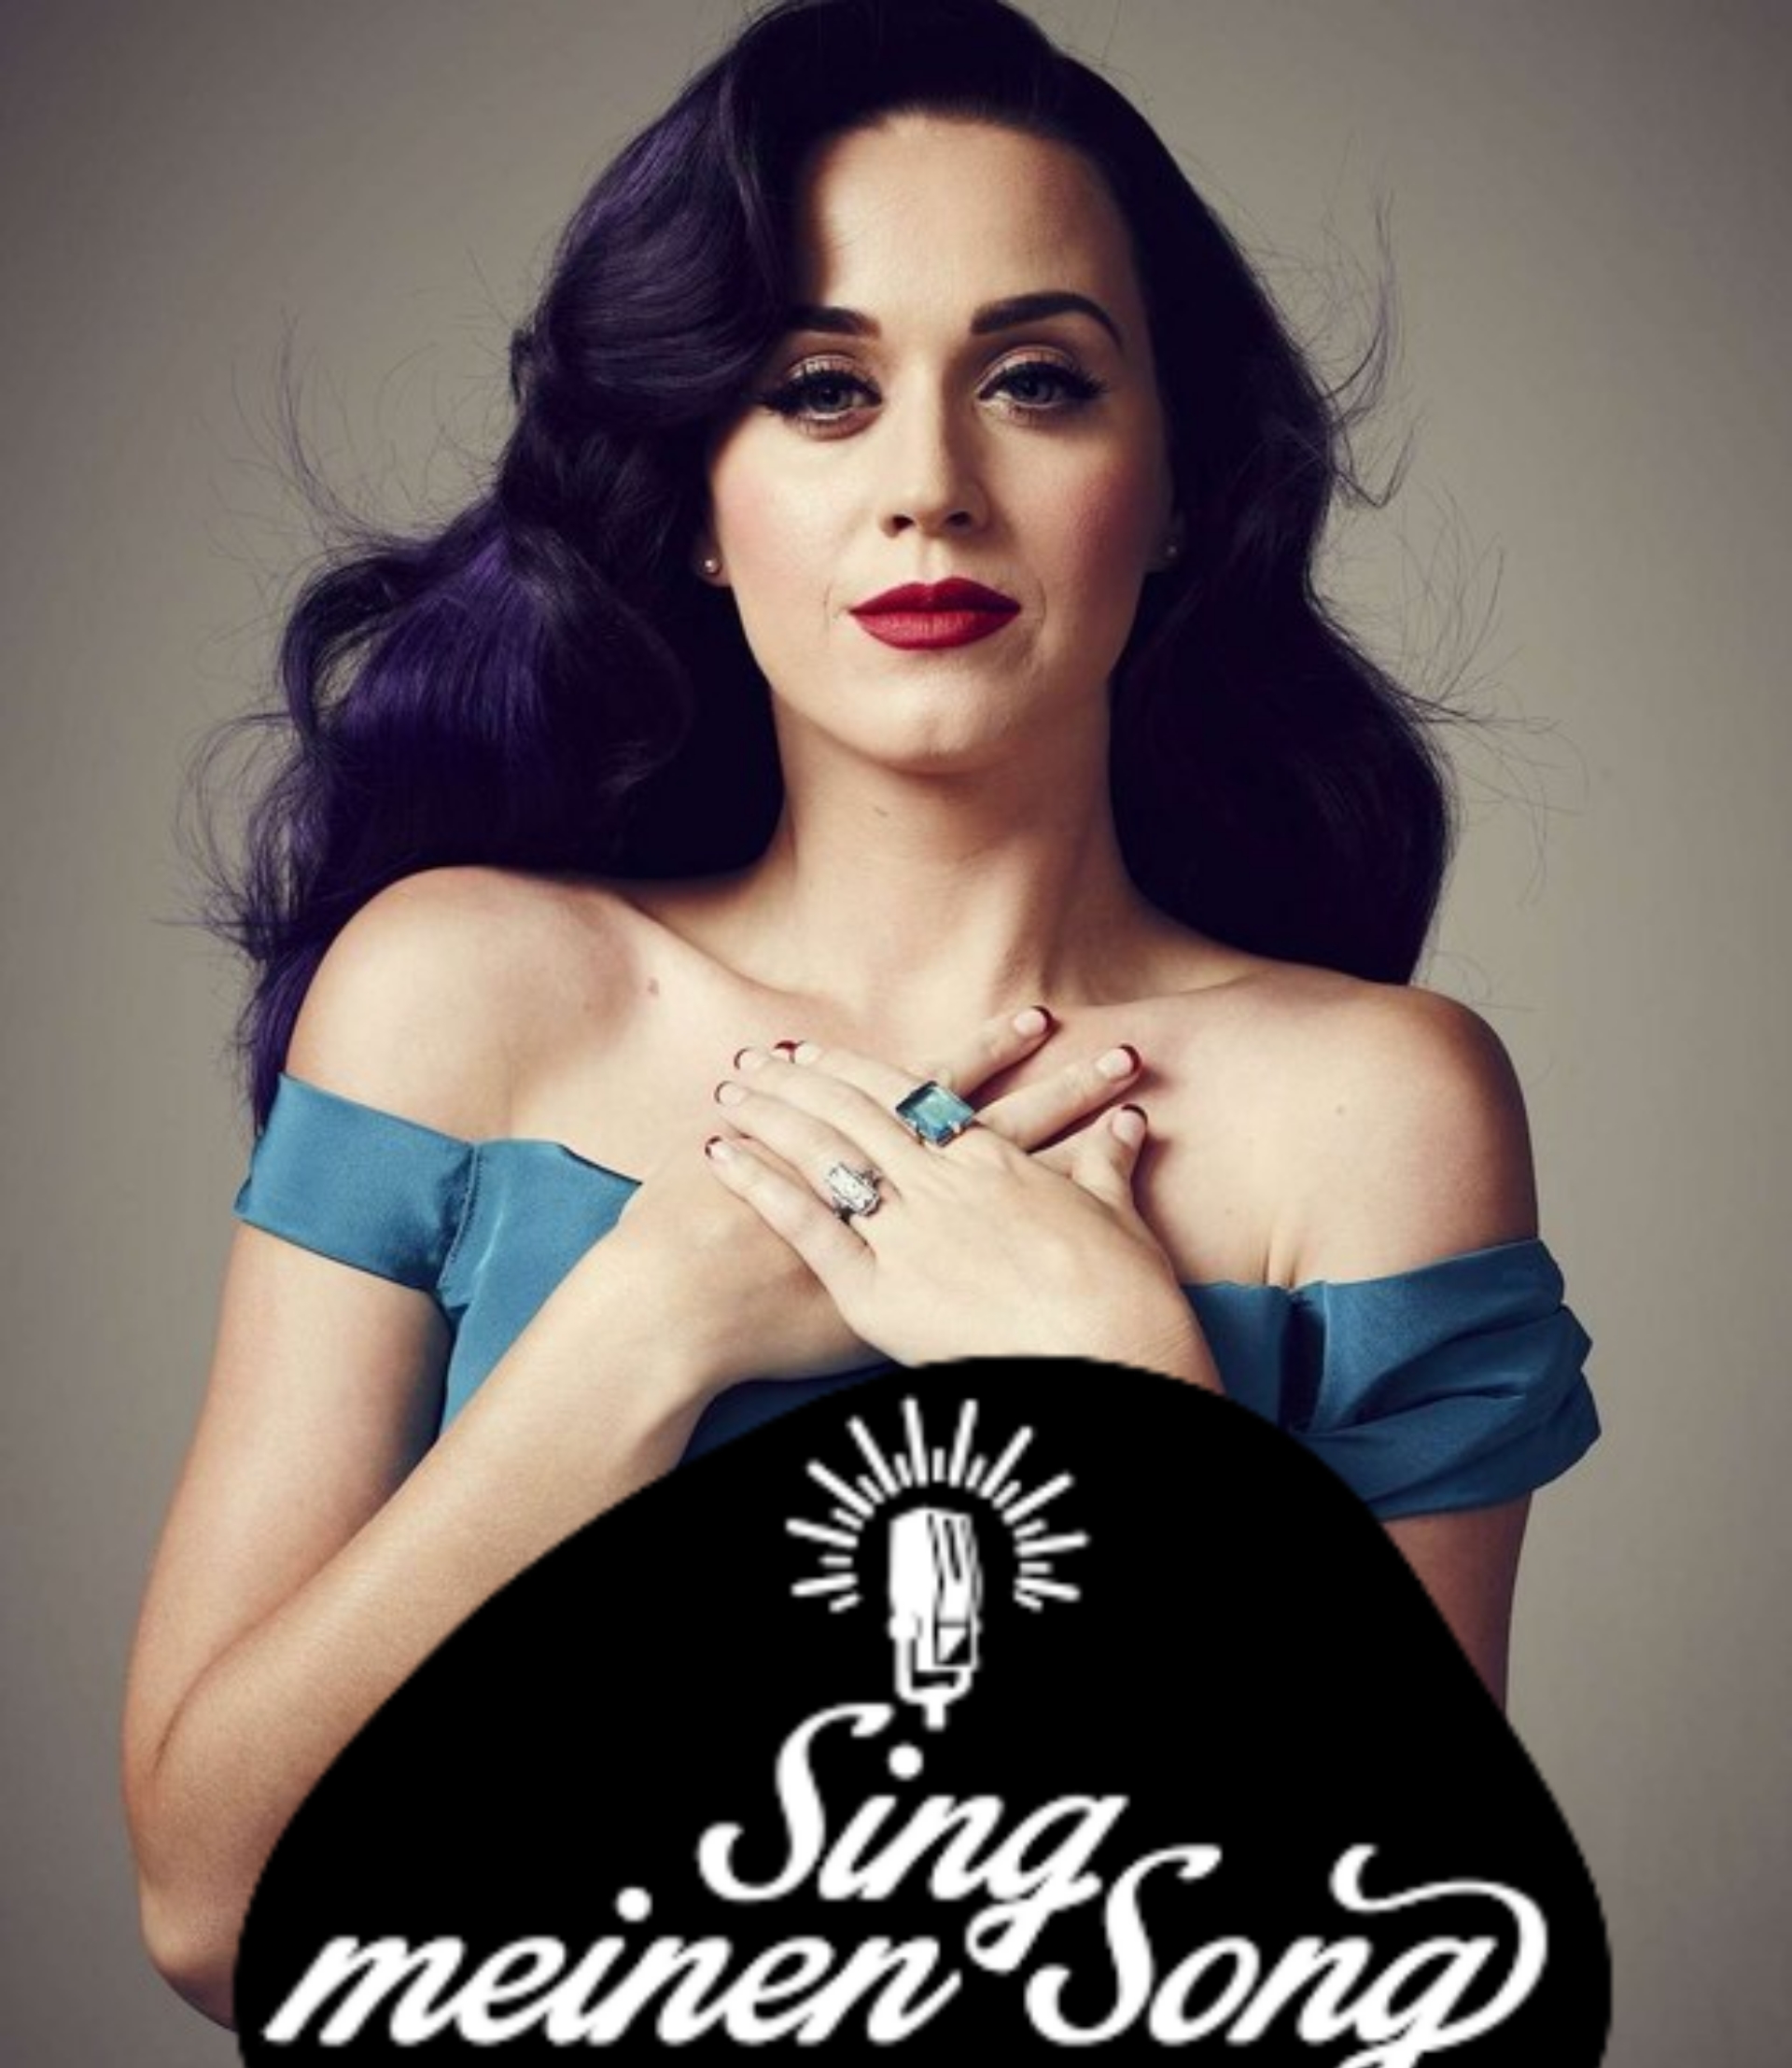 --Opinionstar's Sing meinen Song // Woche 05: Katy Perry--